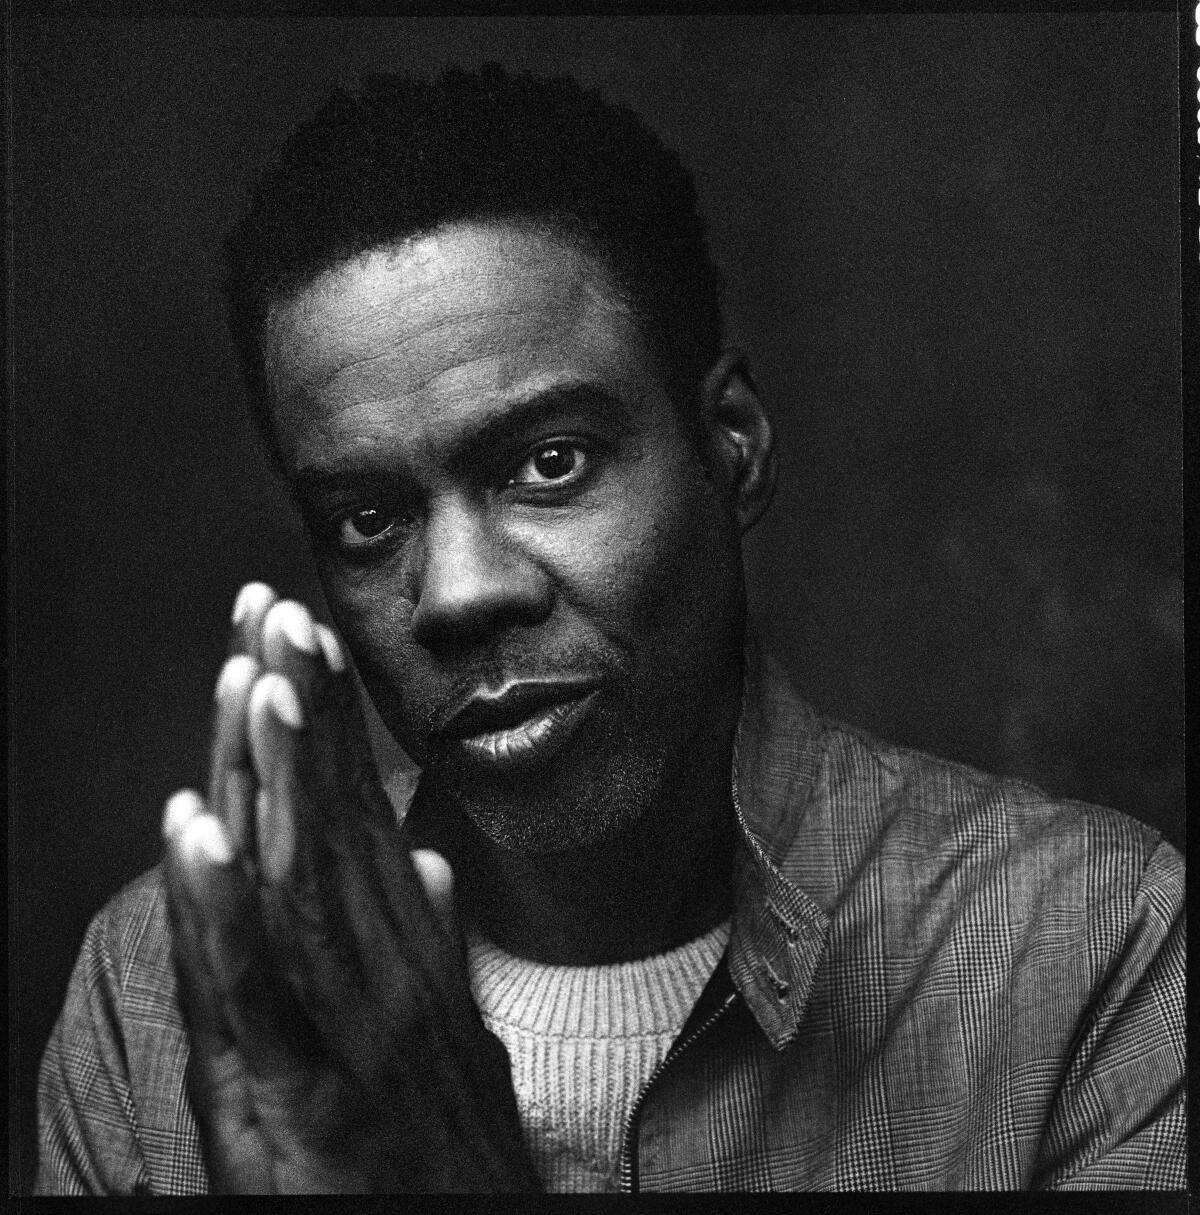 Chris Rock, in a black-and-white photo, holds up his hands as if in prayer